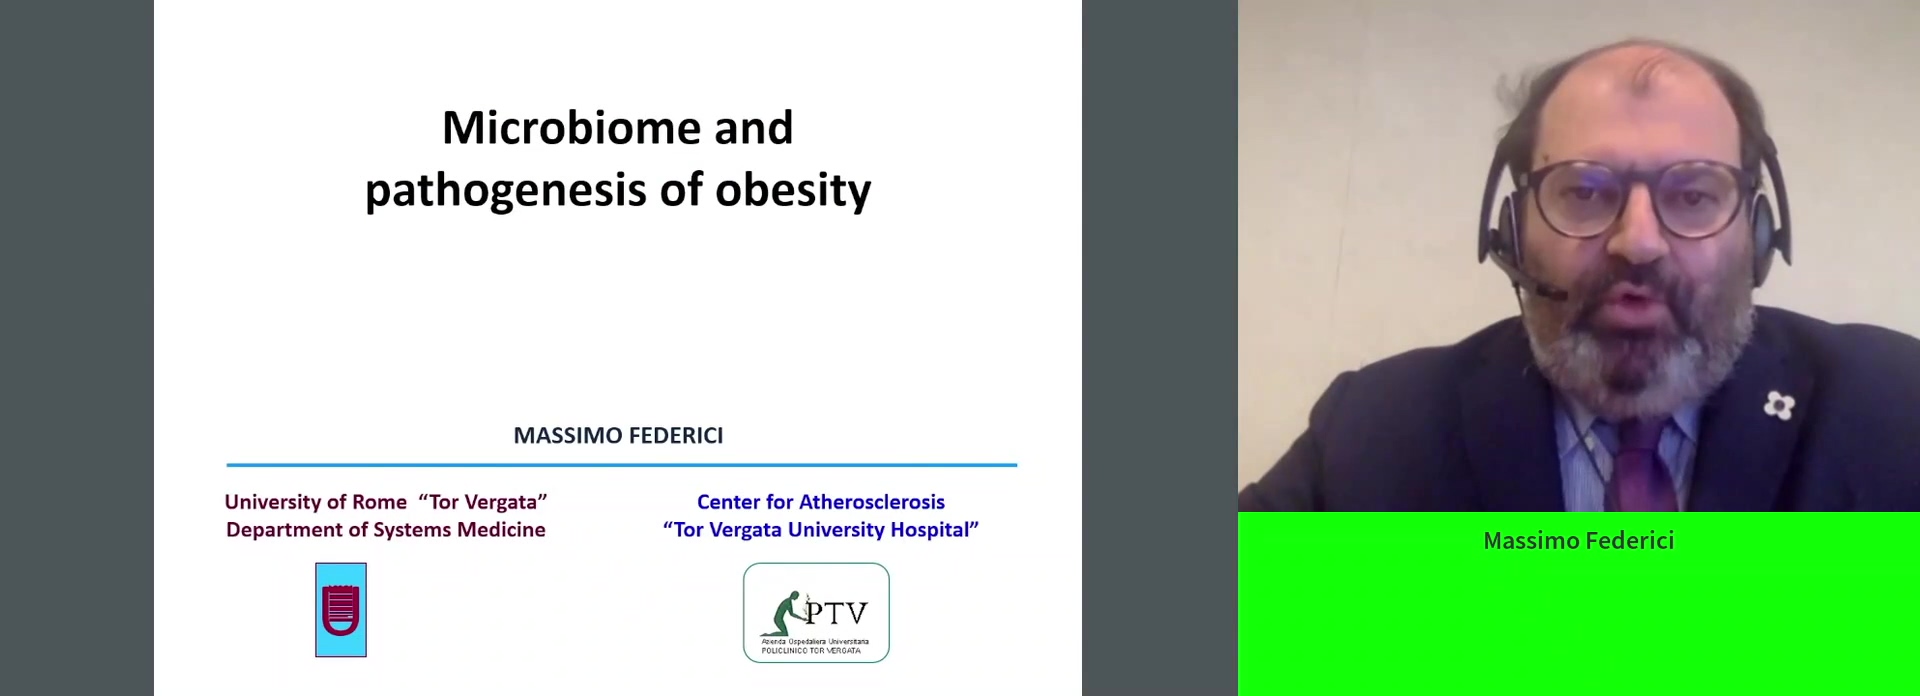 Microbiome and pathogenesis of obesity